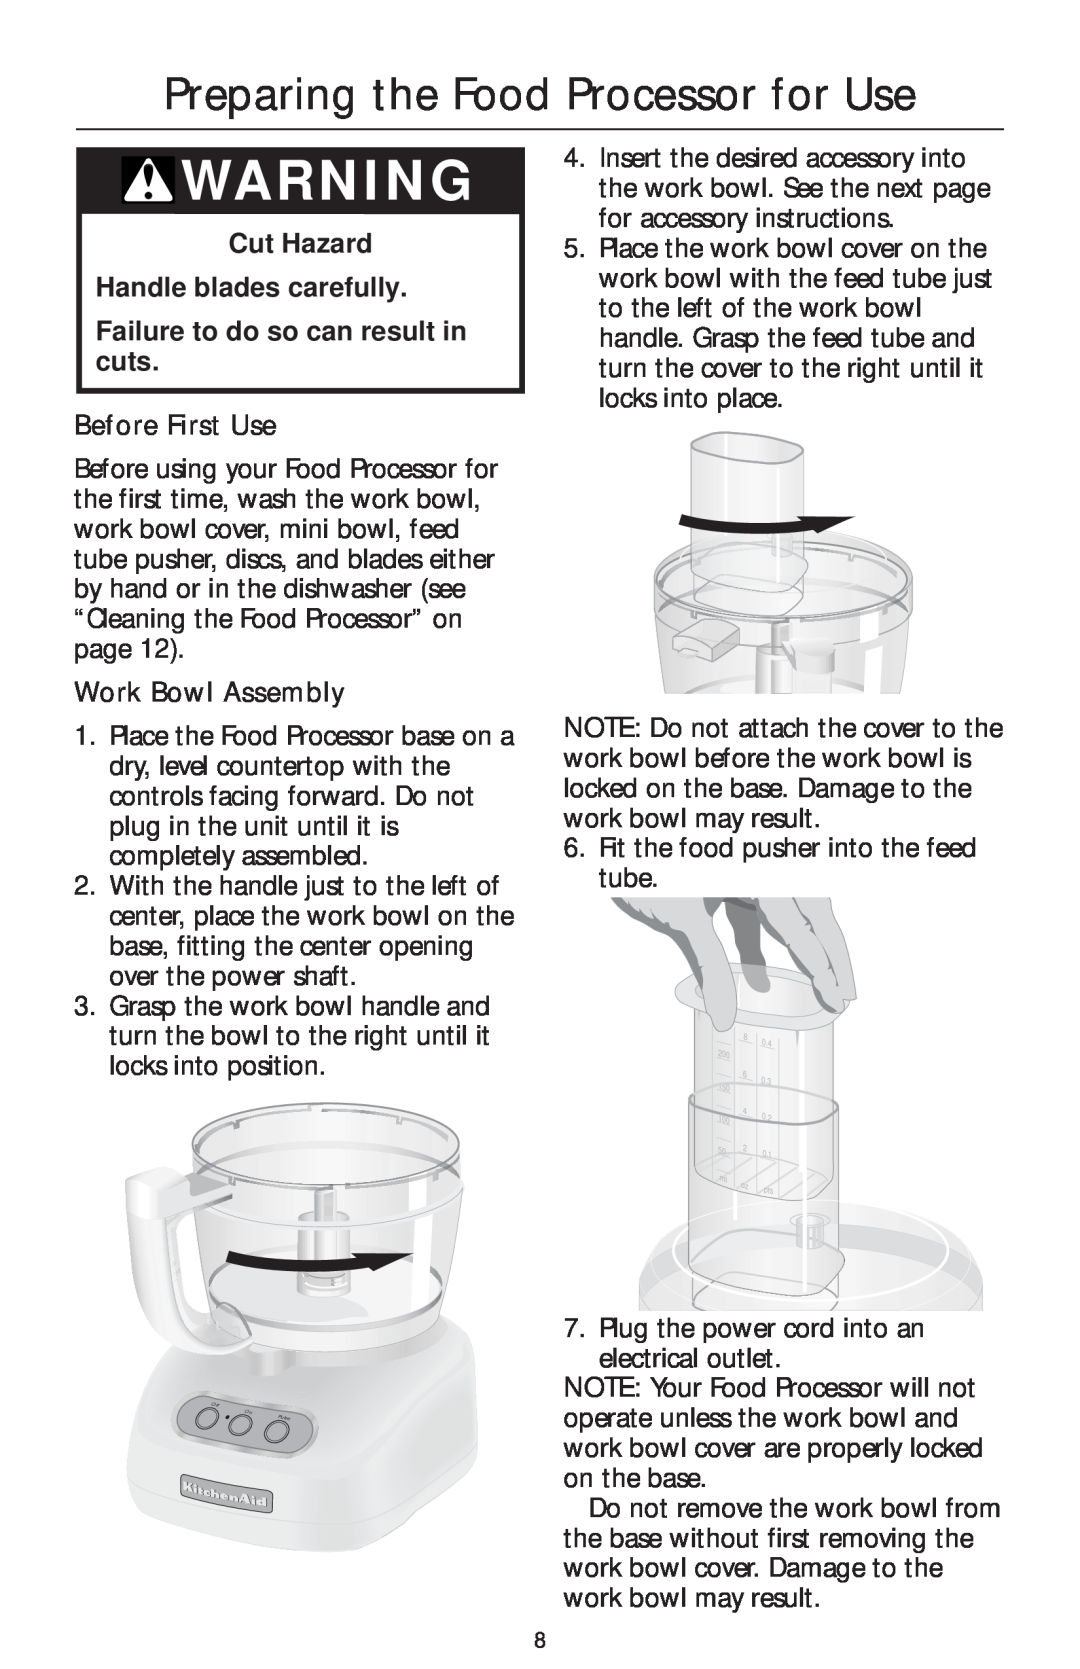 KitchenAid 4KFP740 manual Preparing the Food Processor for Use, Cut Hazard Handle blades carefully, Before First Use 